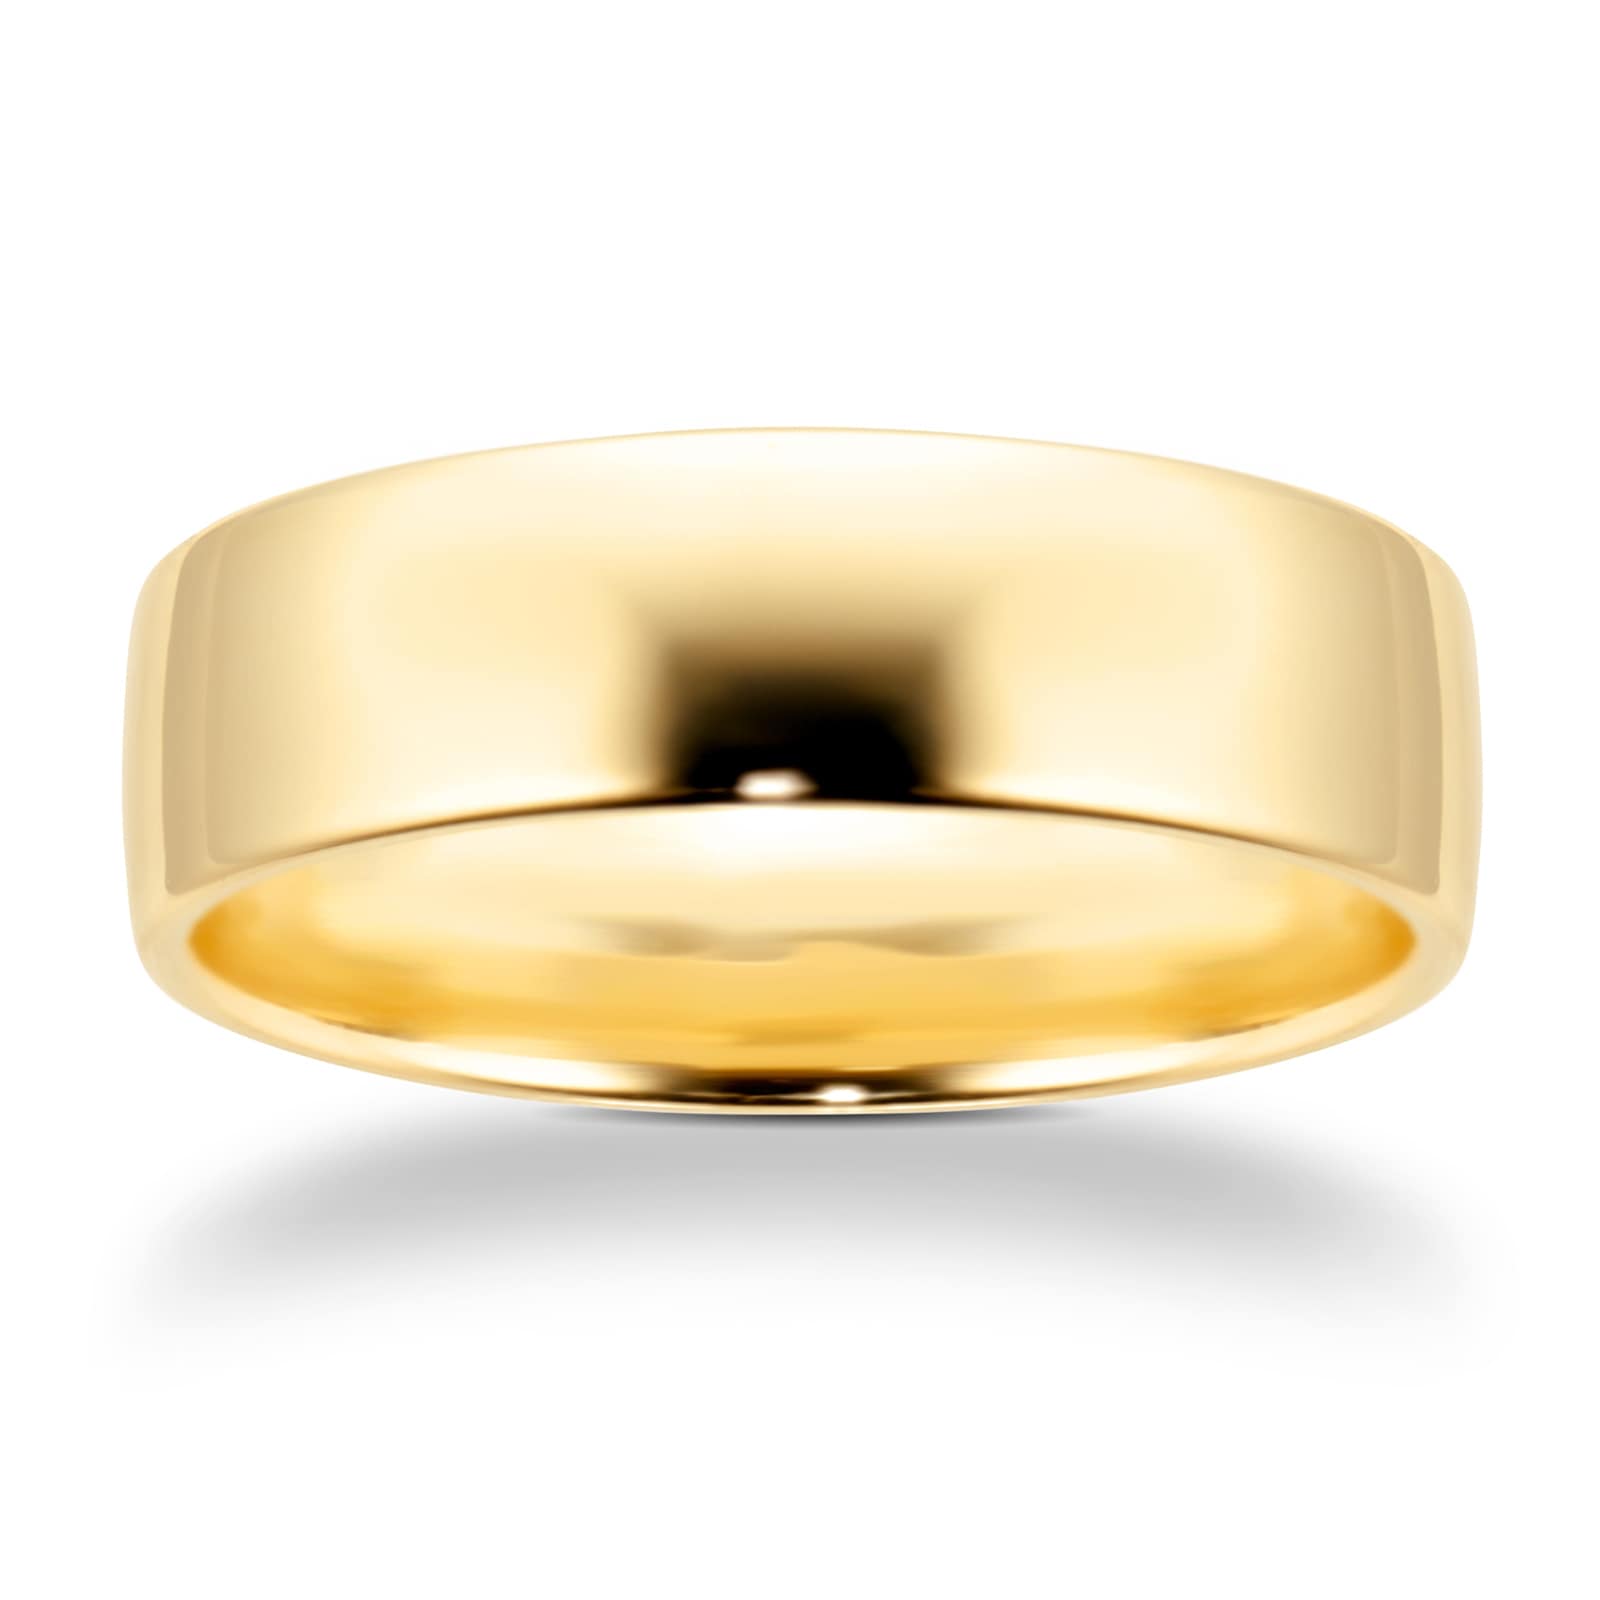 6mm Slight Court Standard Wedding Ring In 18 Carat Yellow Gold - Ring Size S